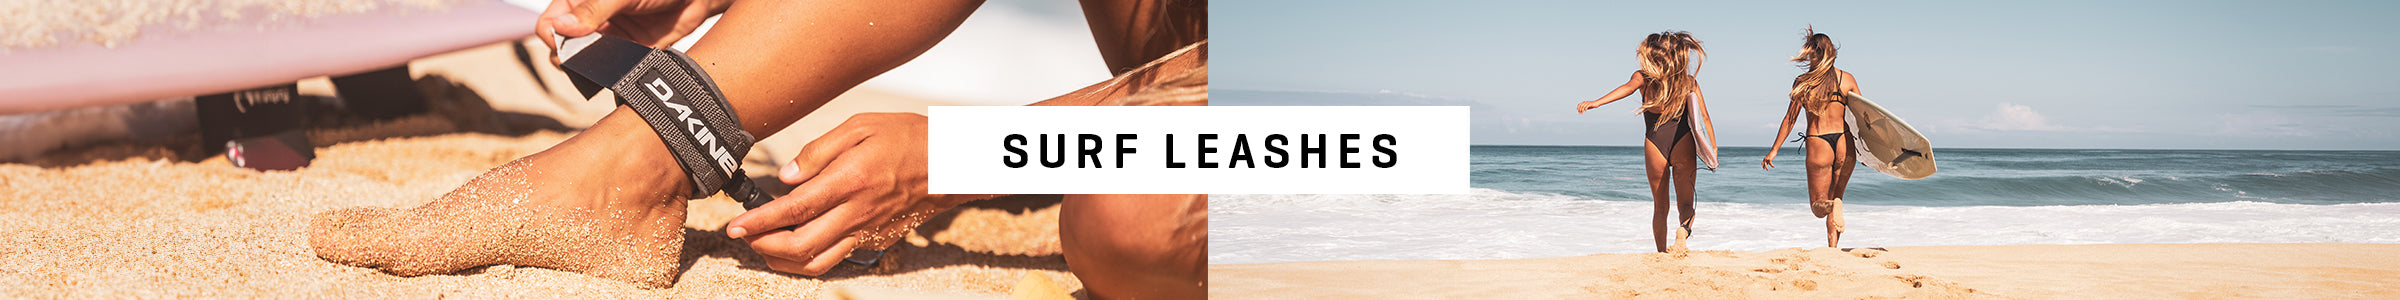 Surf Leashes